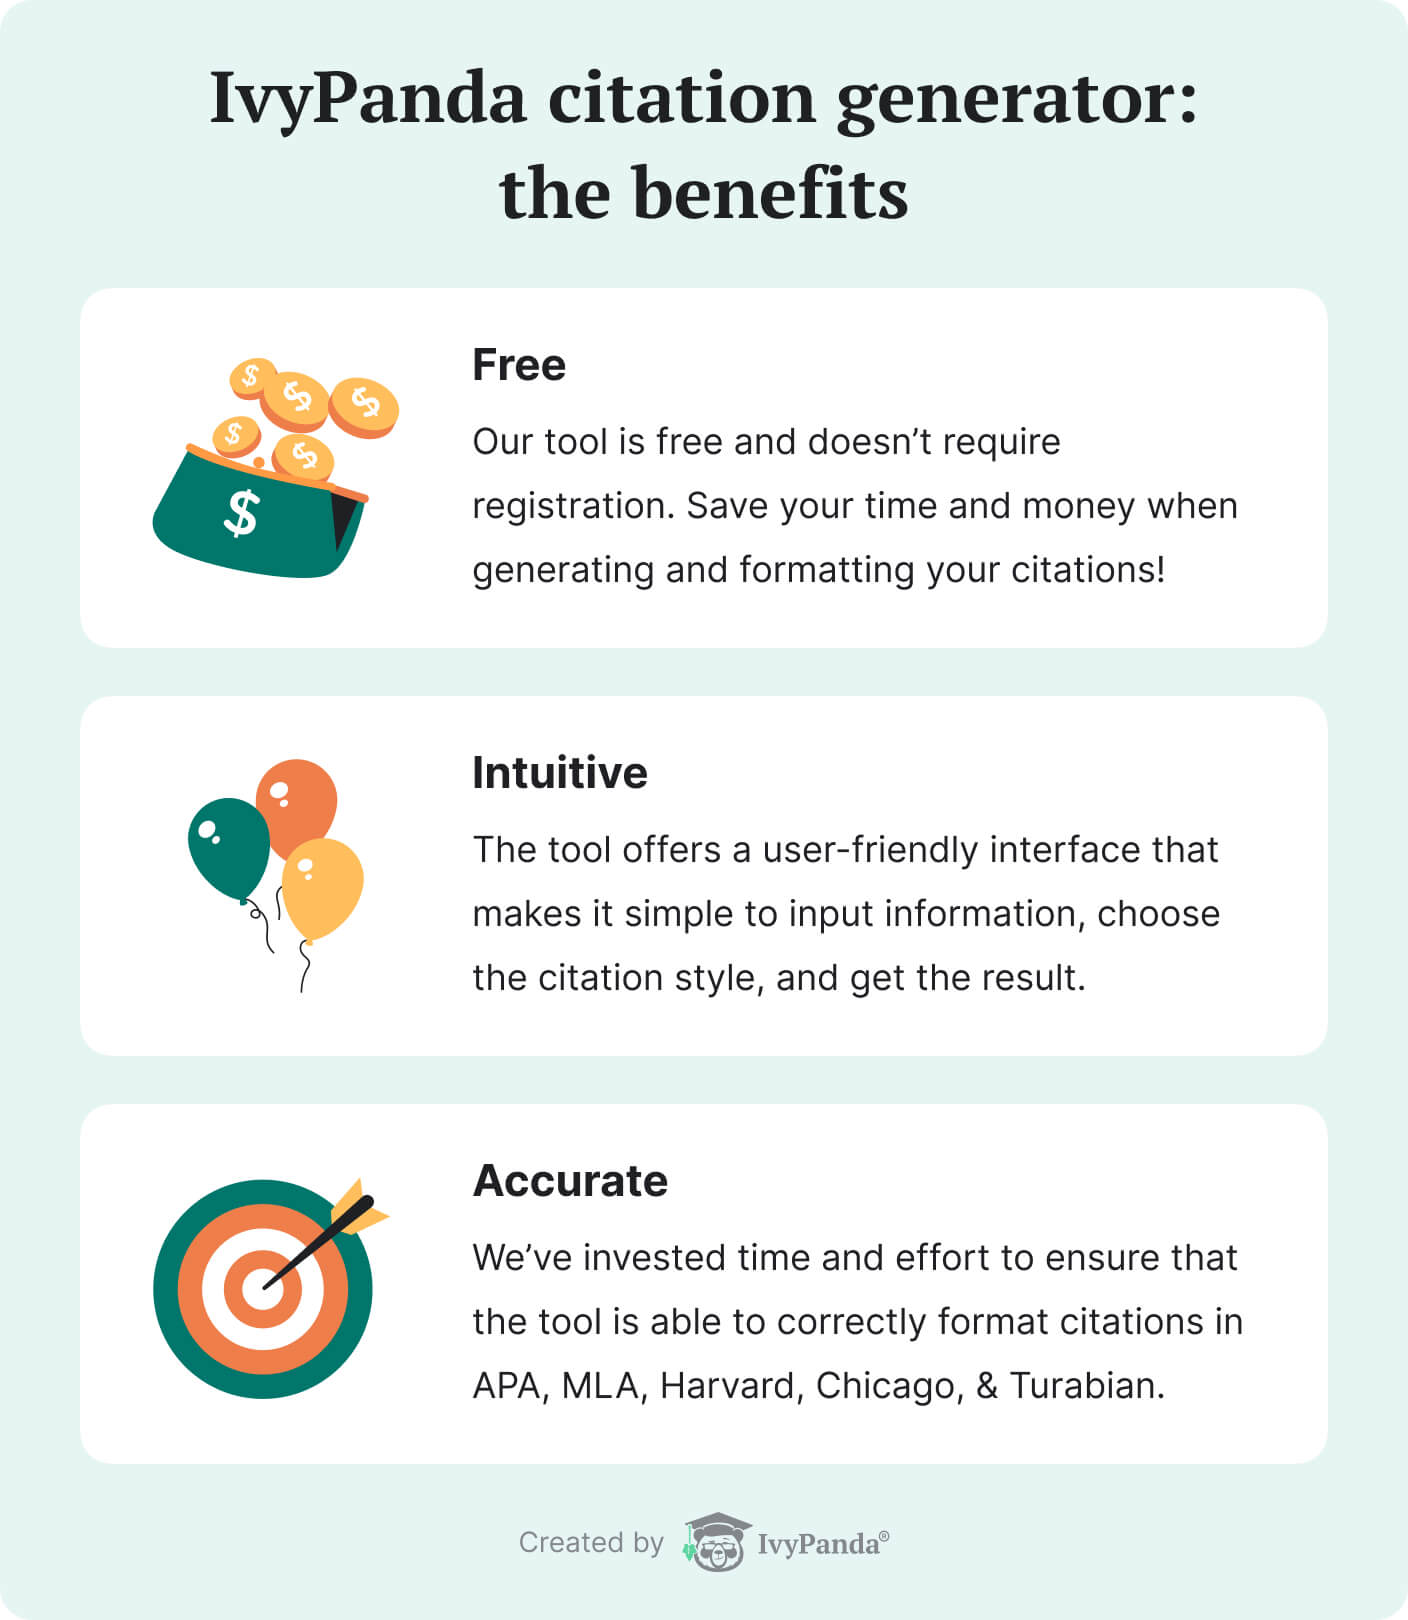 The picture lists the benefits of the free citation generator by IvyPanda.